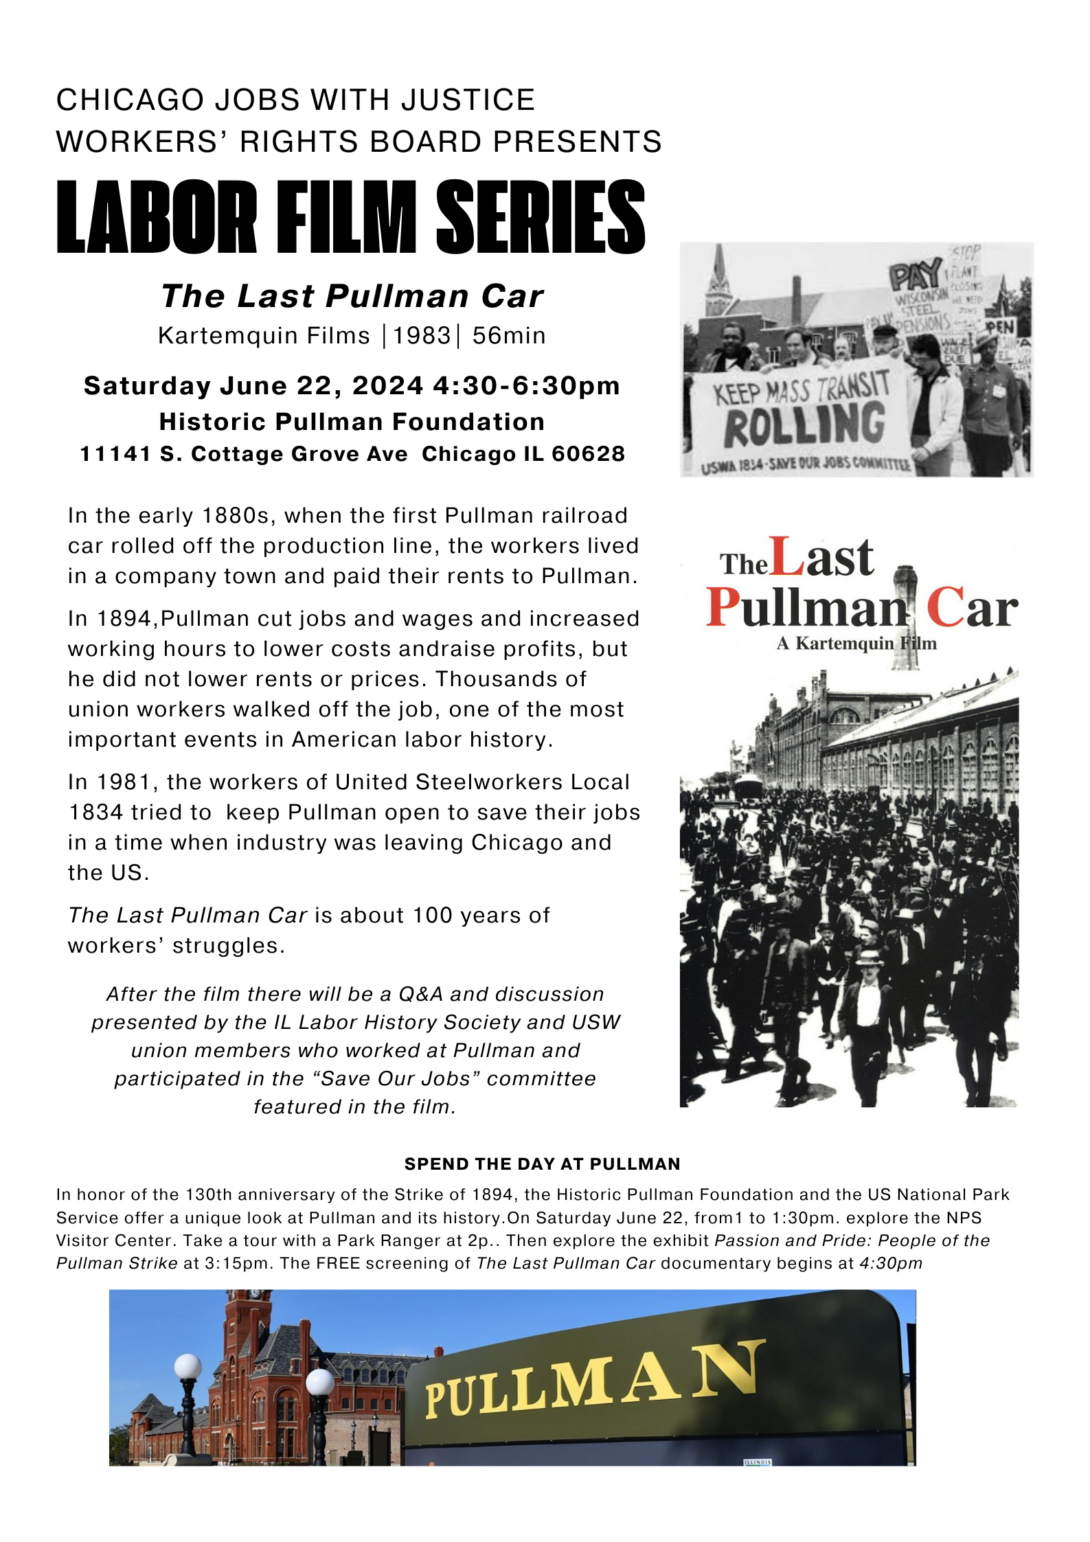 Spend the day at Pullman with Chicago JWJ!